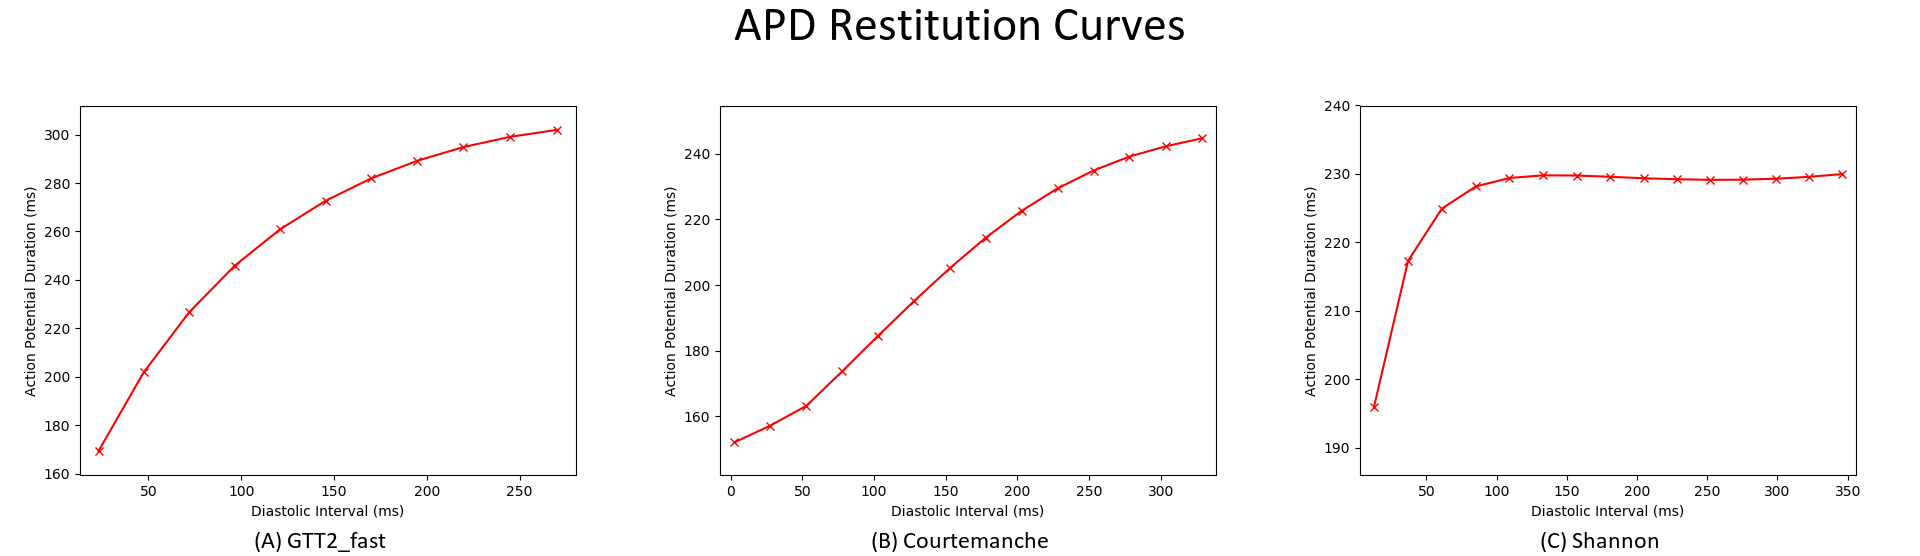 Differences in restitution curves tenTuscher, Courtemanche and Shannon model